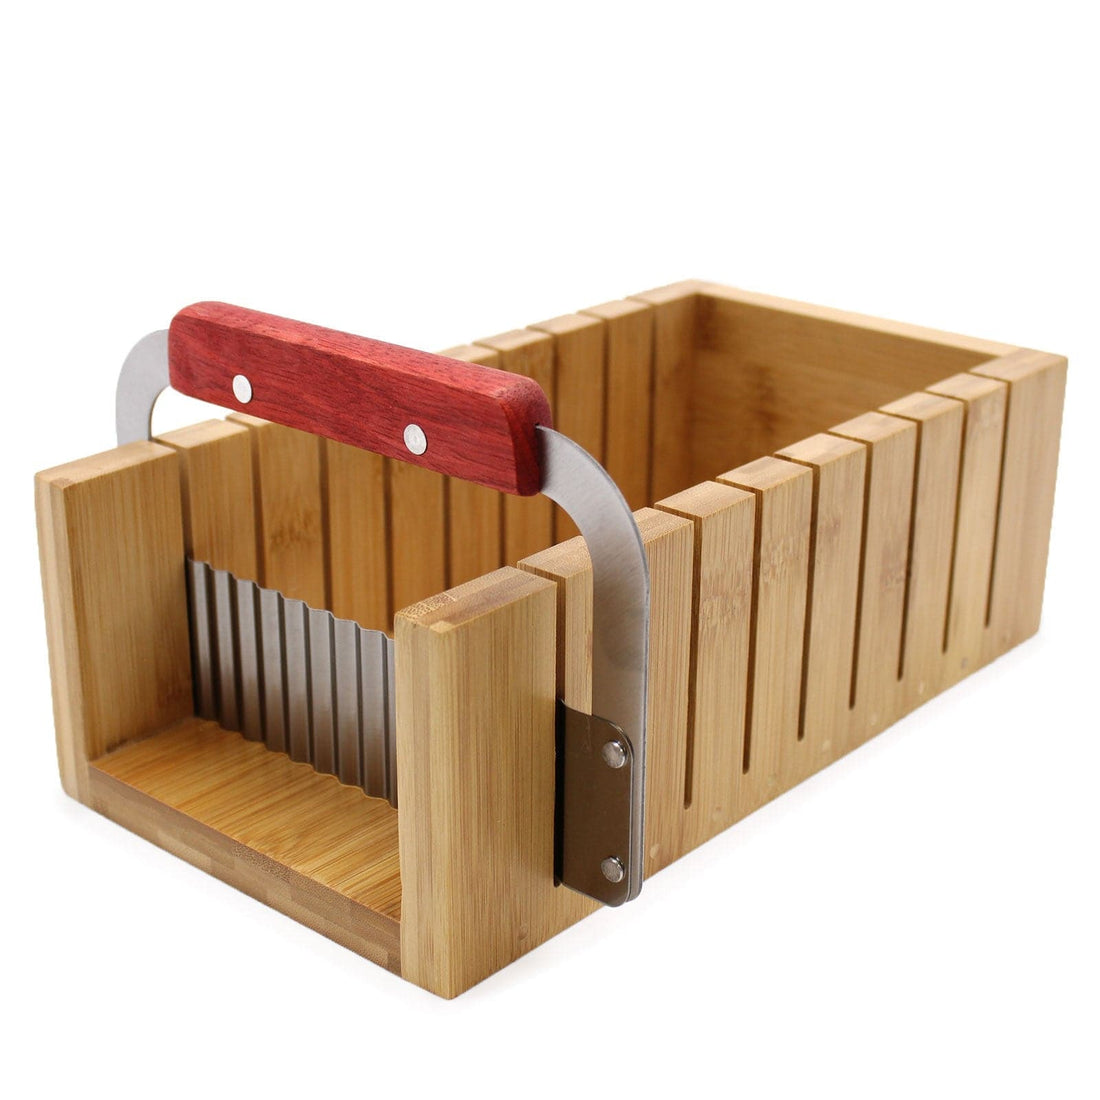 Wooden Soap Loaf Cutter Set - Wavy and Straight Cutter - best price from Maltashopper.com HMS-48